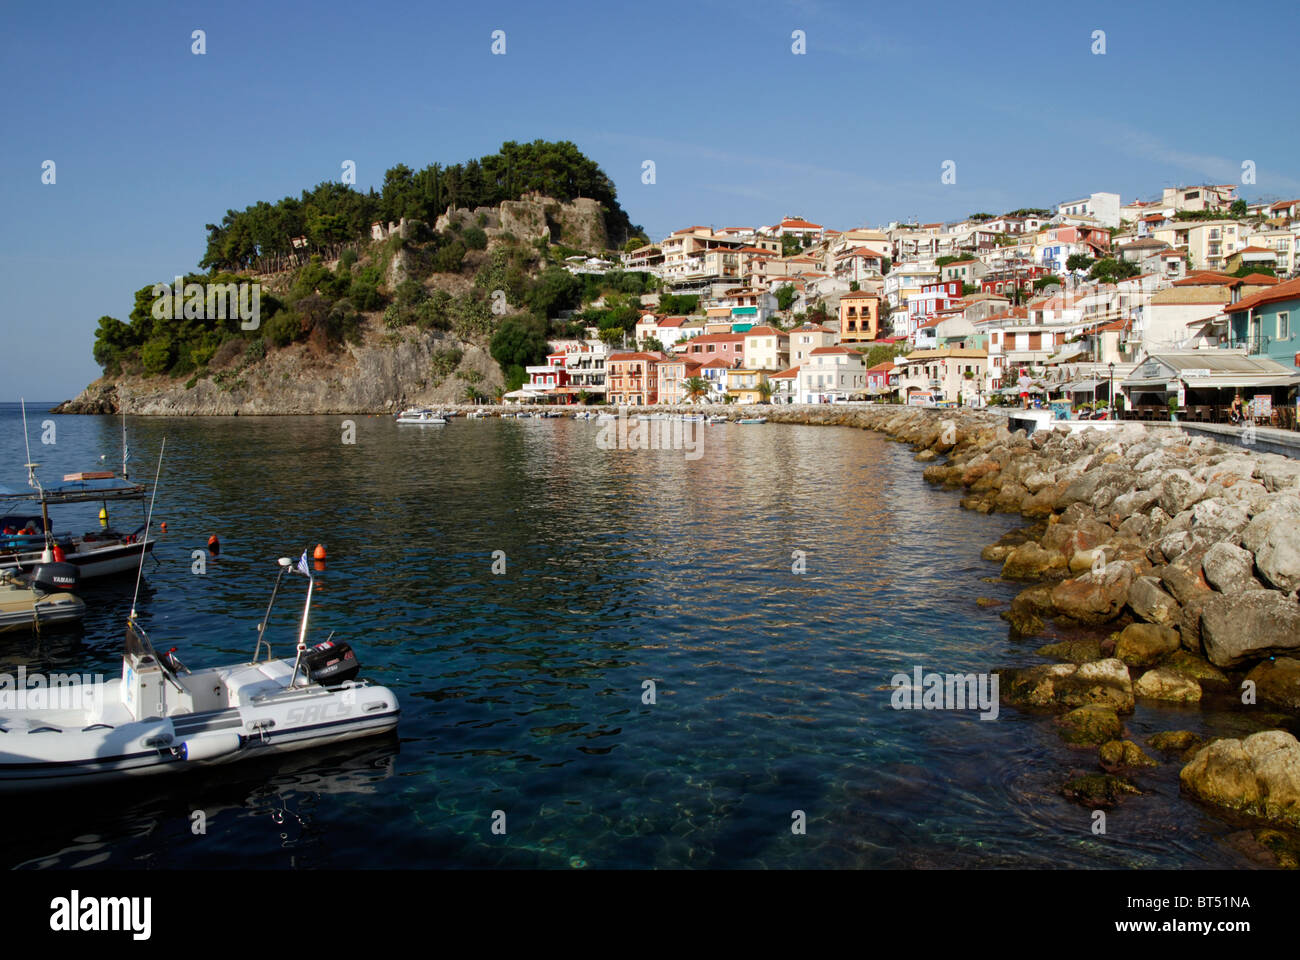 The Harbour at Parga showing the Old Town and Venetian Castle. Stock Photo